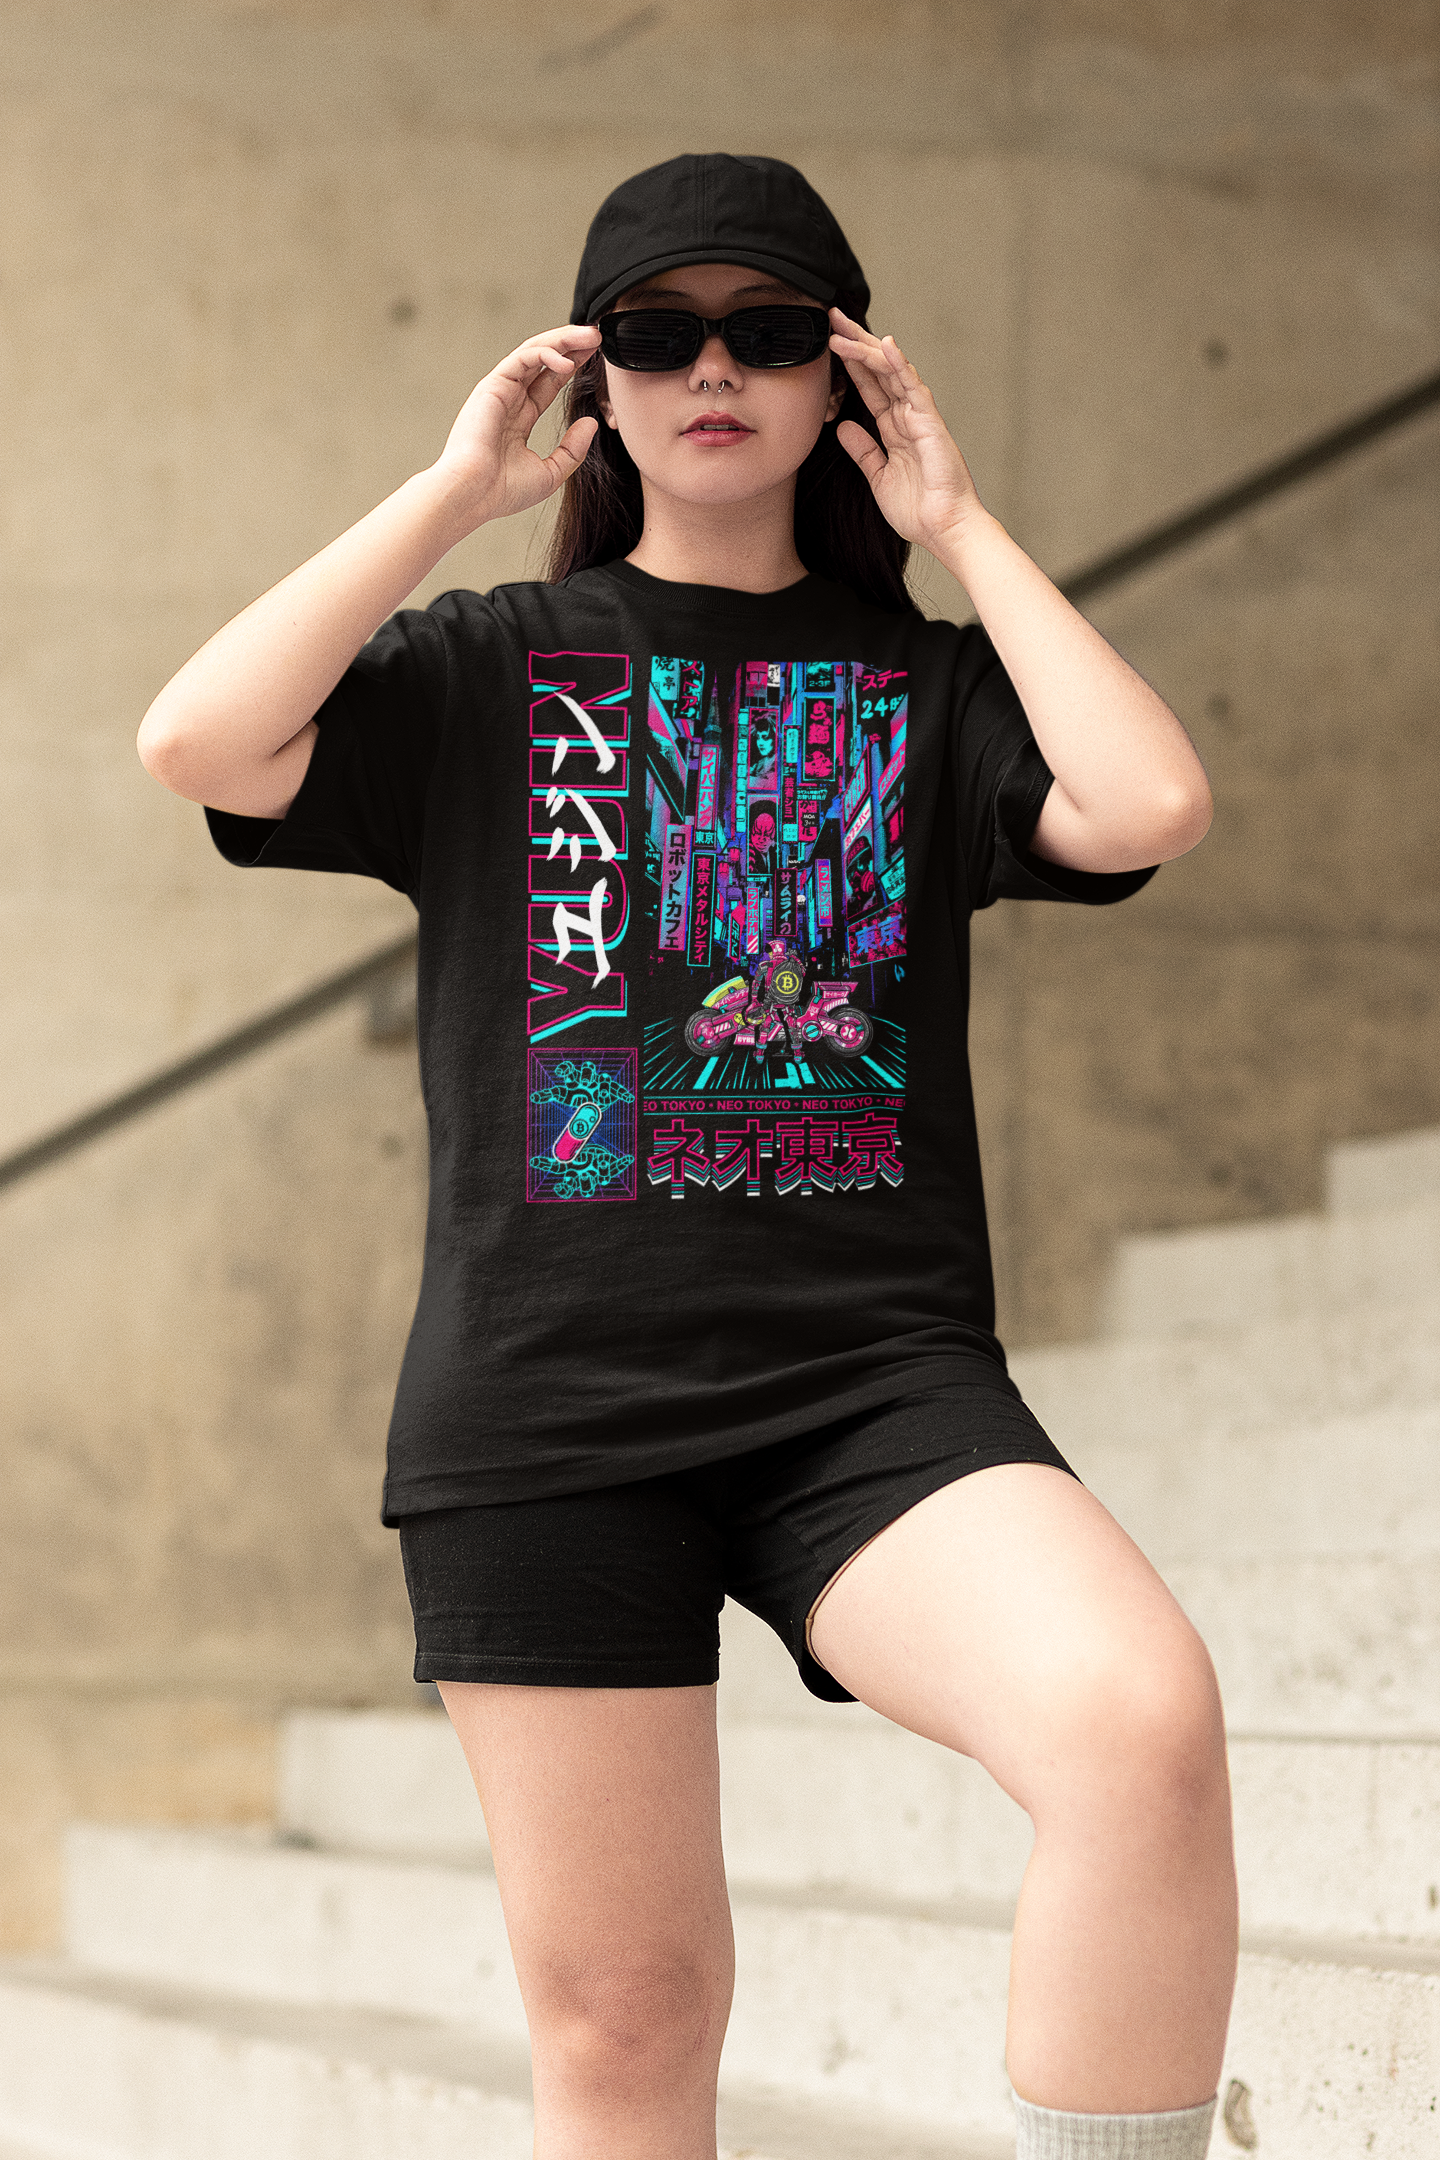 NEW LIMITED Anime Girl Japanese Aesthetic Design Great Gift Idea T-Shirt  S-3XL